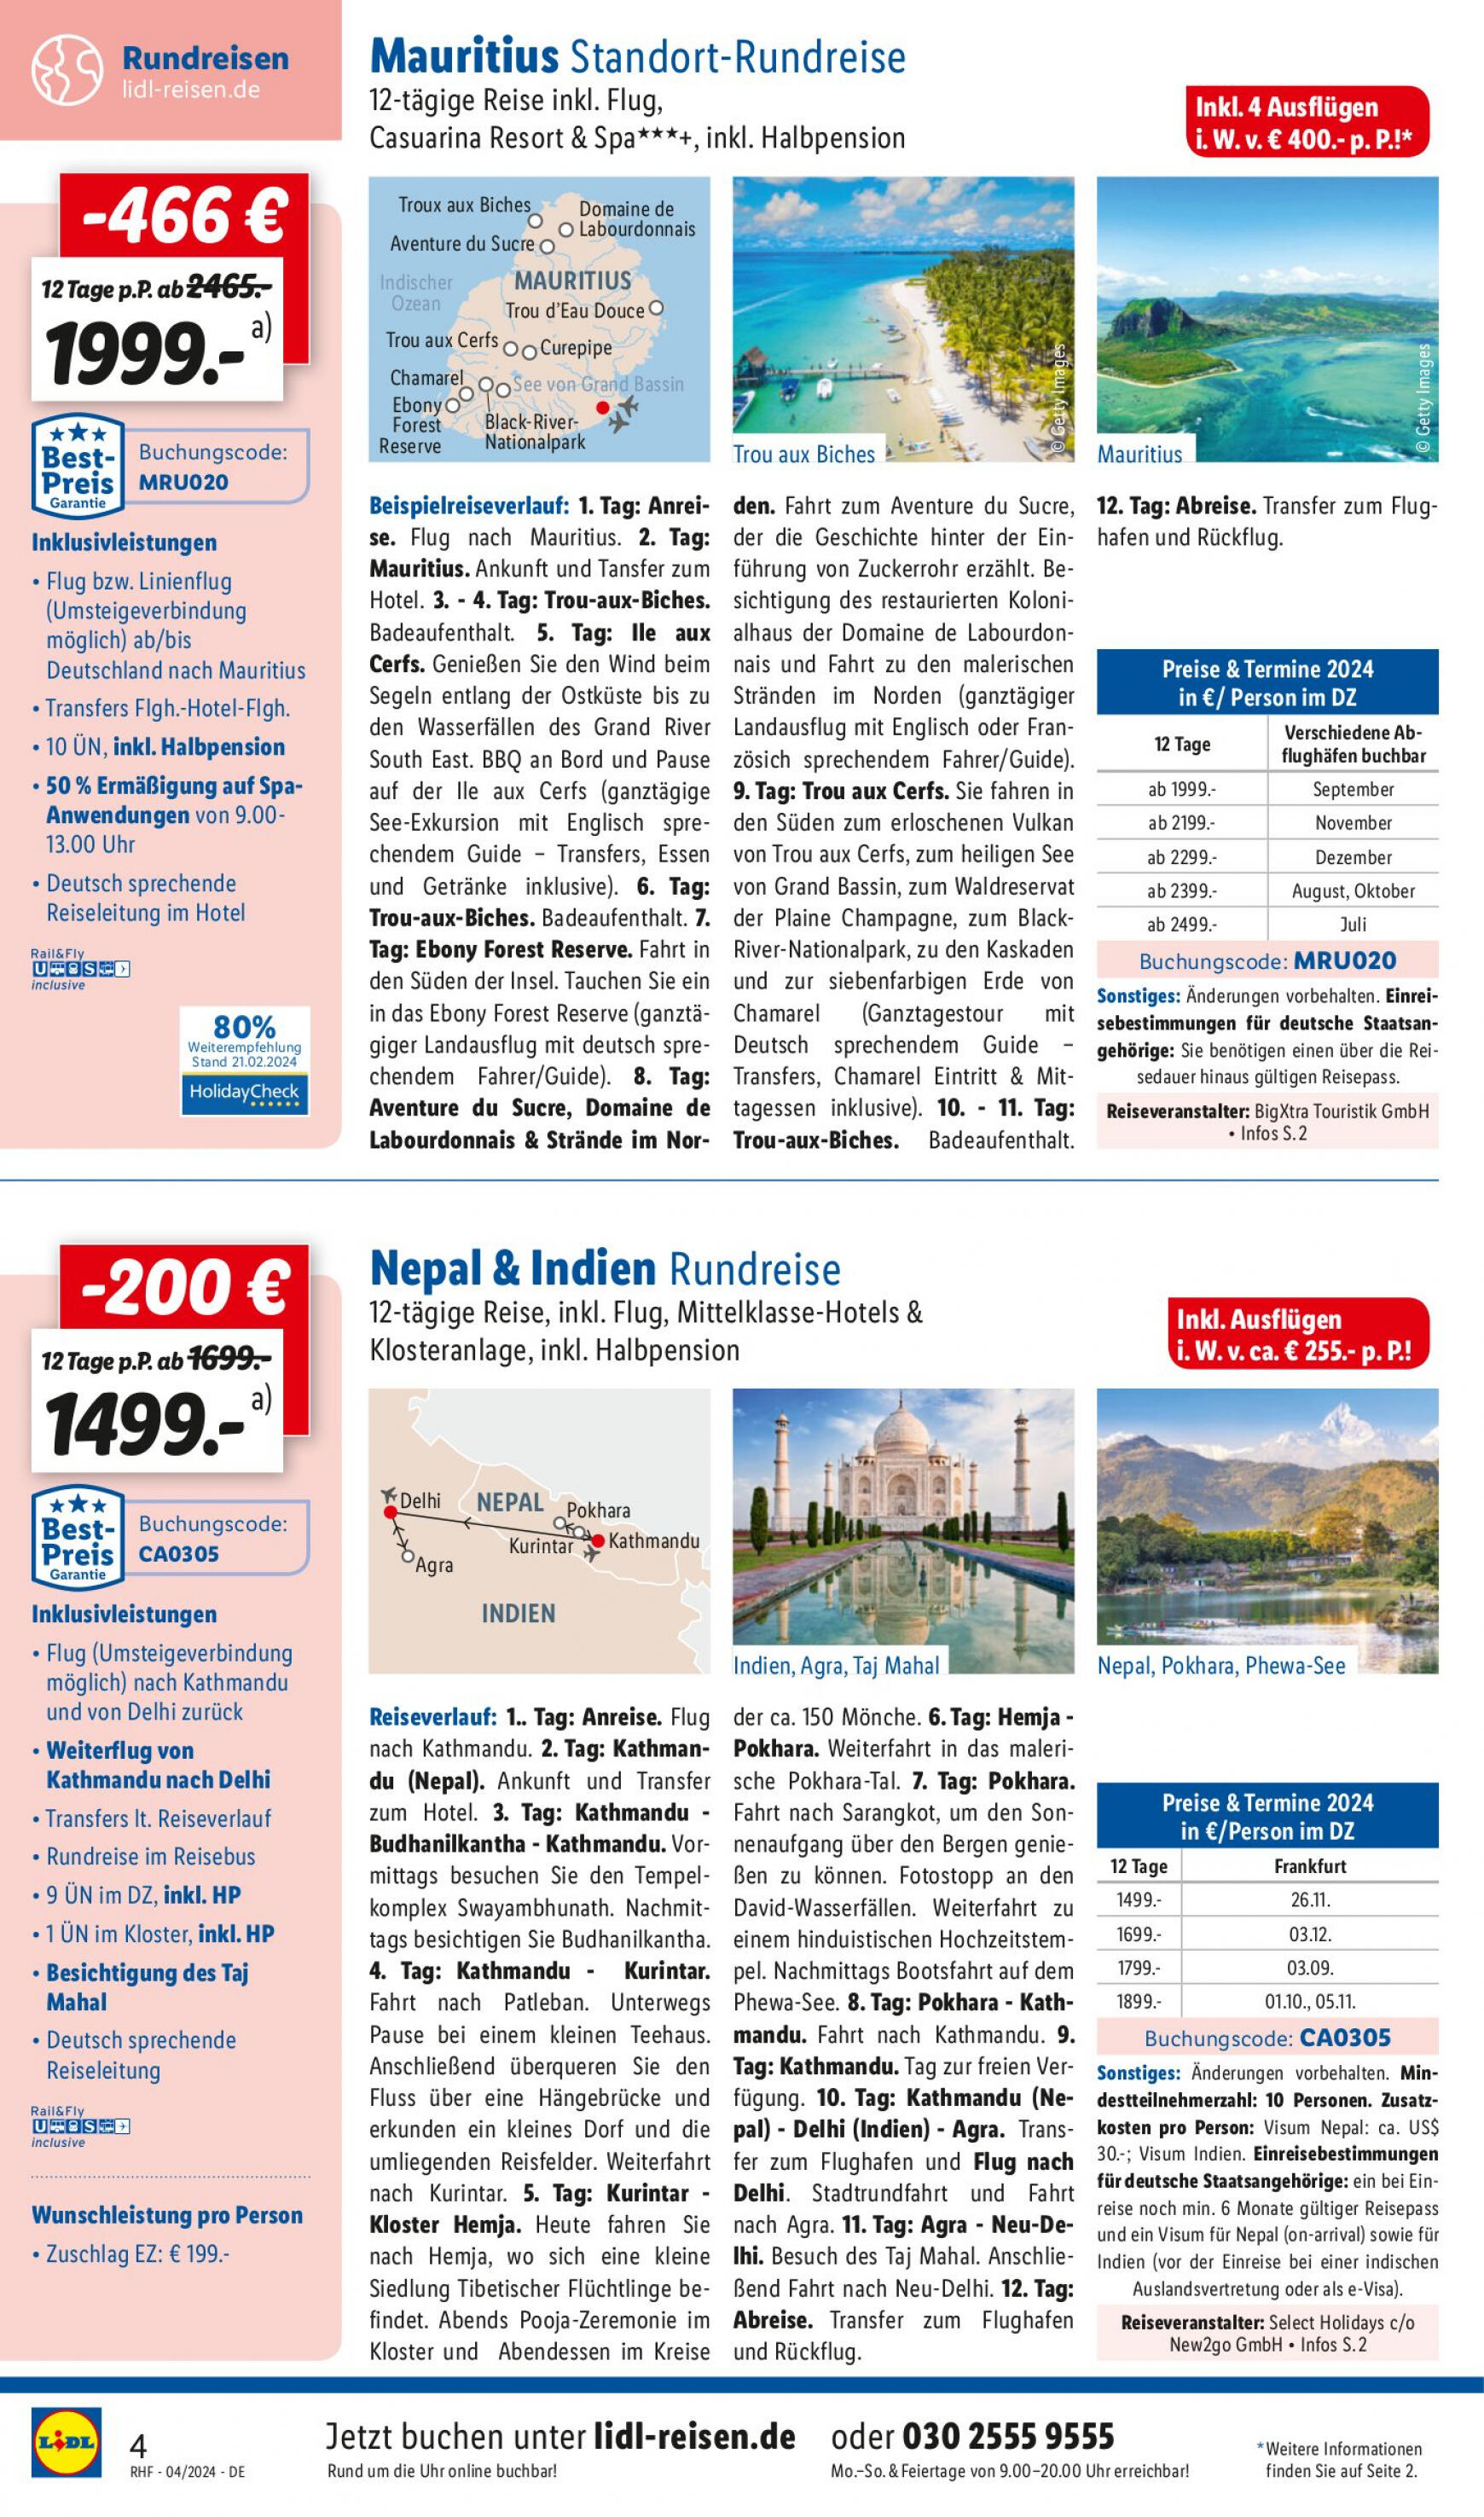 lidl - Flyer Lidl - April Reise-Highlights aktuell 27.03. - 30.04. - page: 4